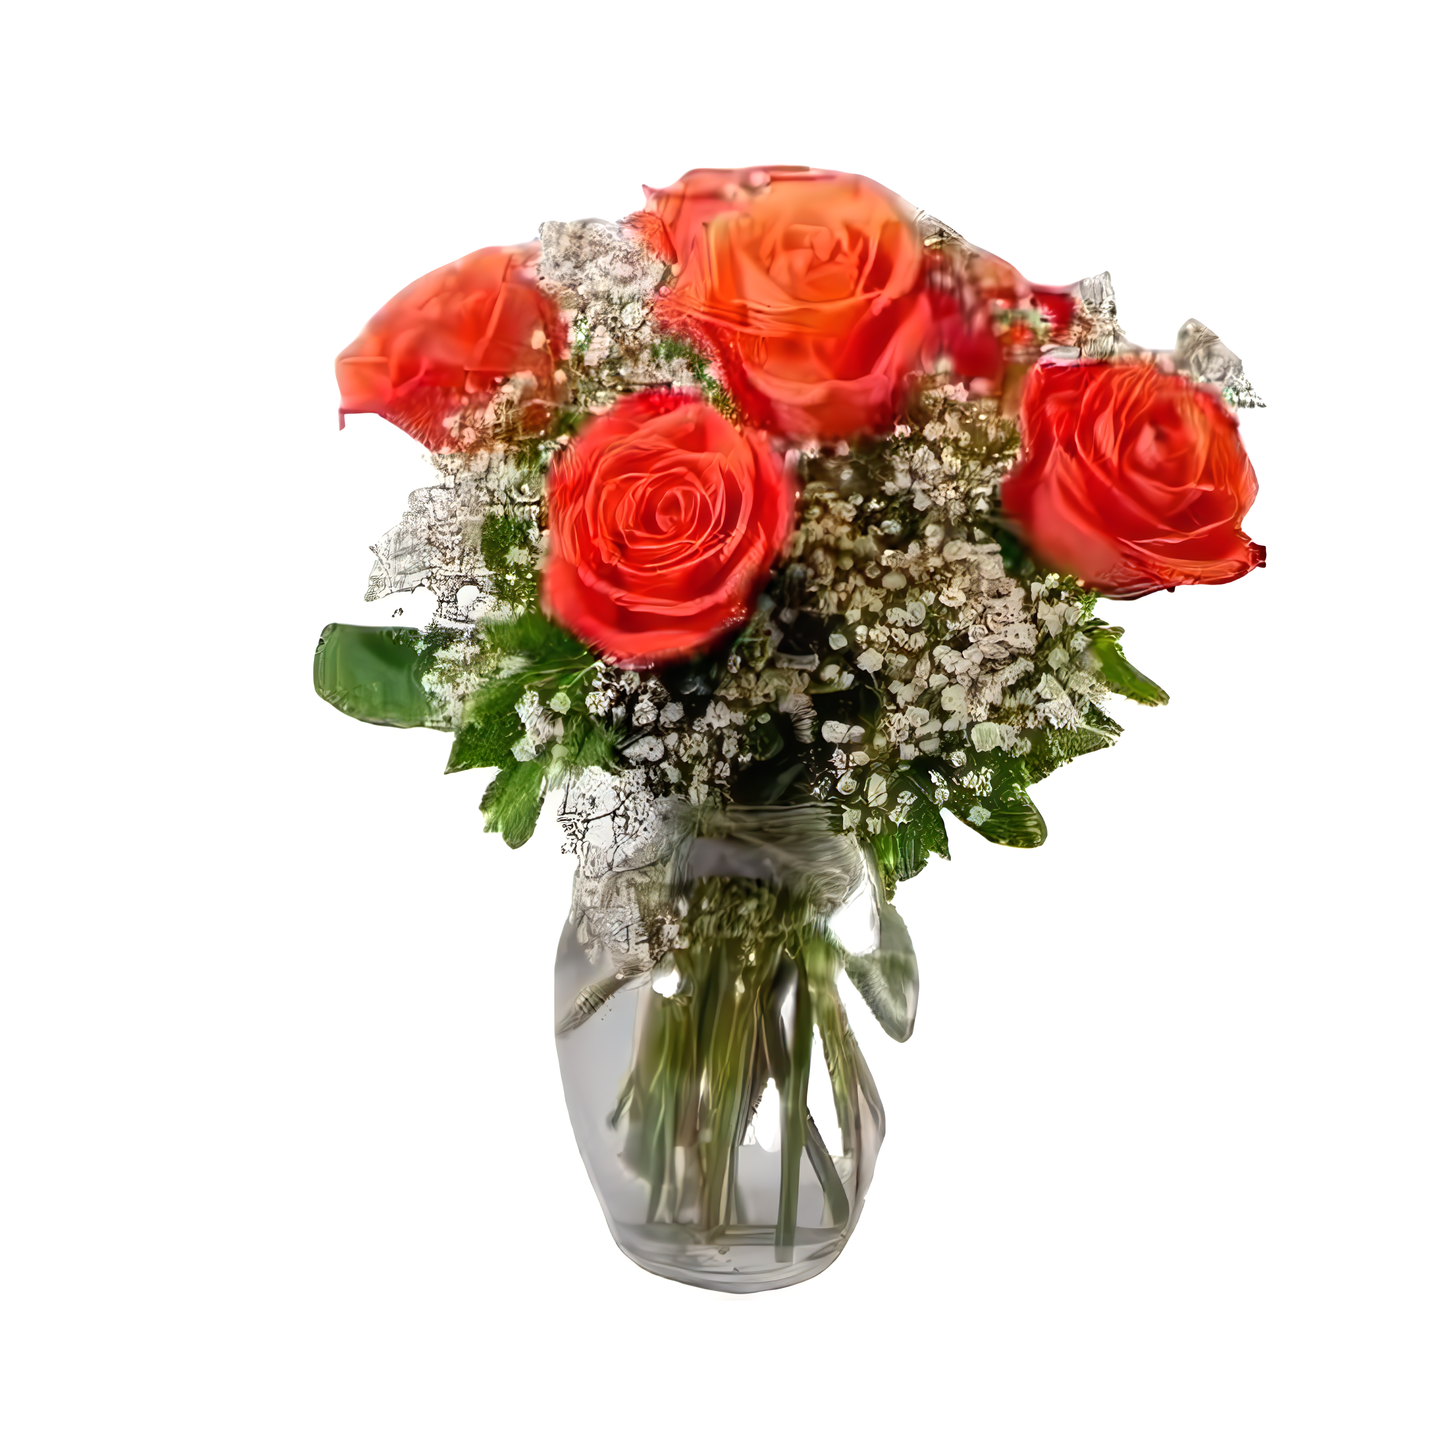 NYC Flower Delivery - Love's Embrace Roses Orange - Roses